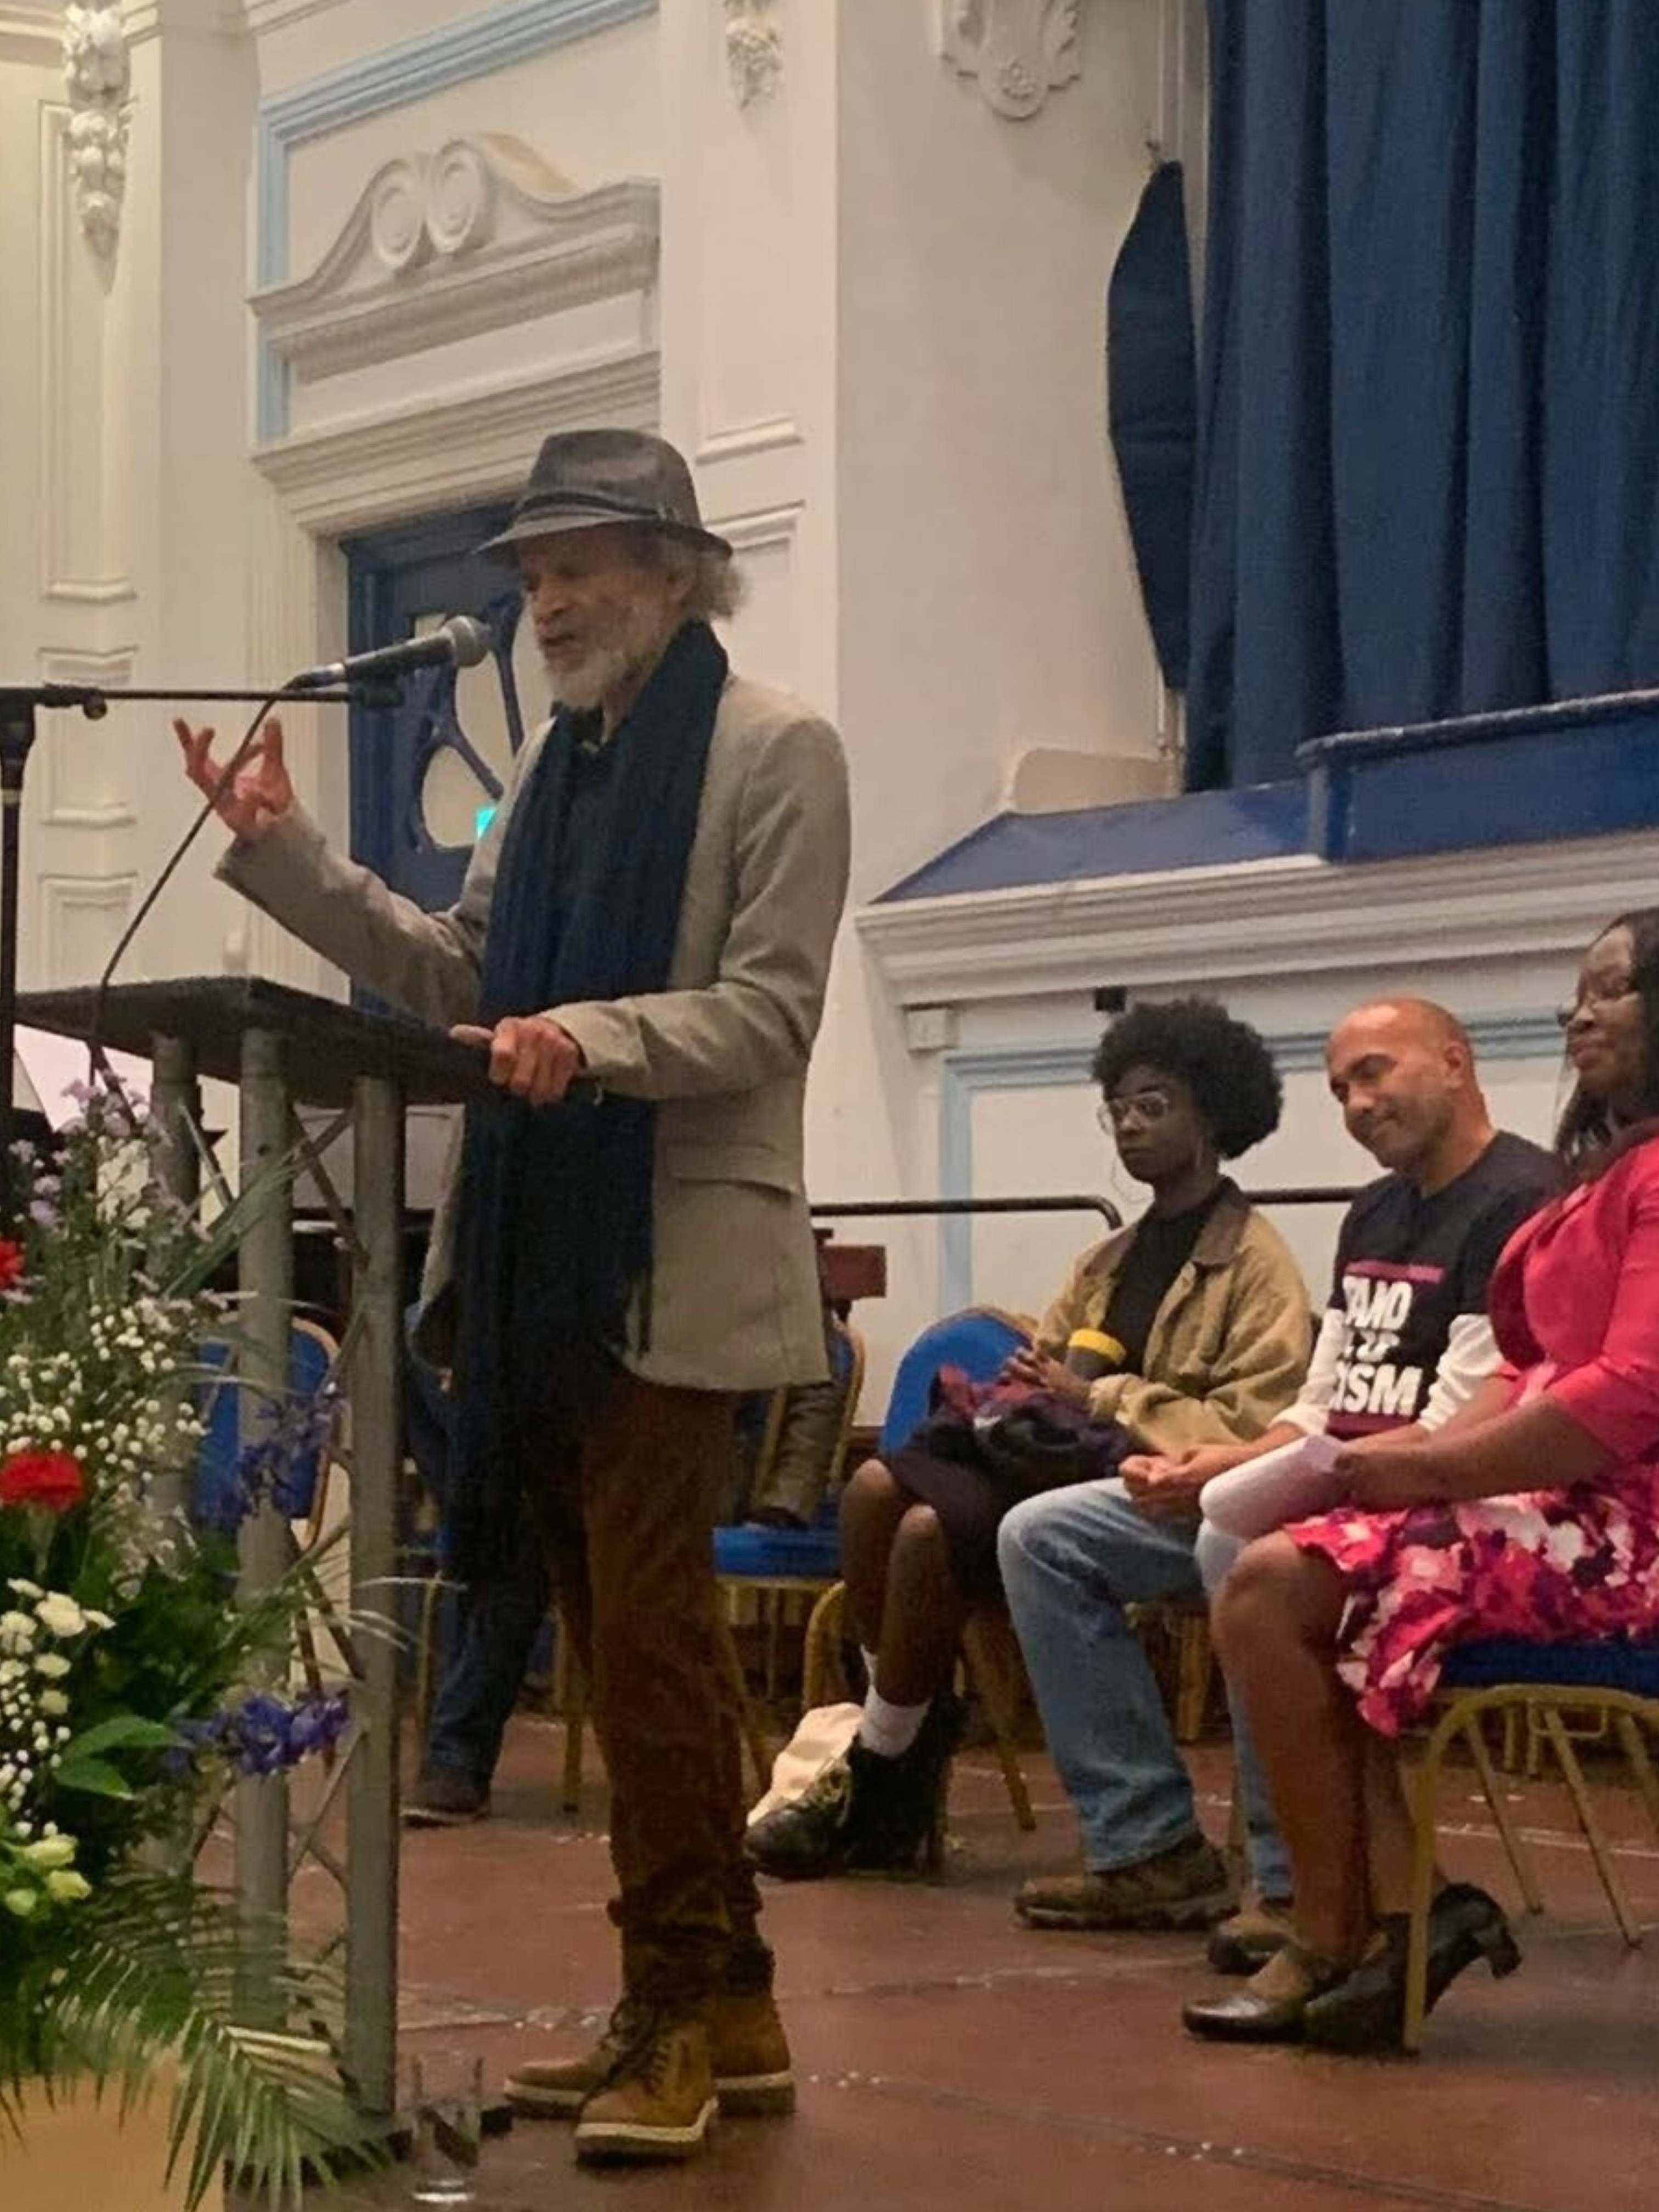 John Agard reading poetry with Priss Nash, Nick Hines and Cllr Dr Janet Baah behind